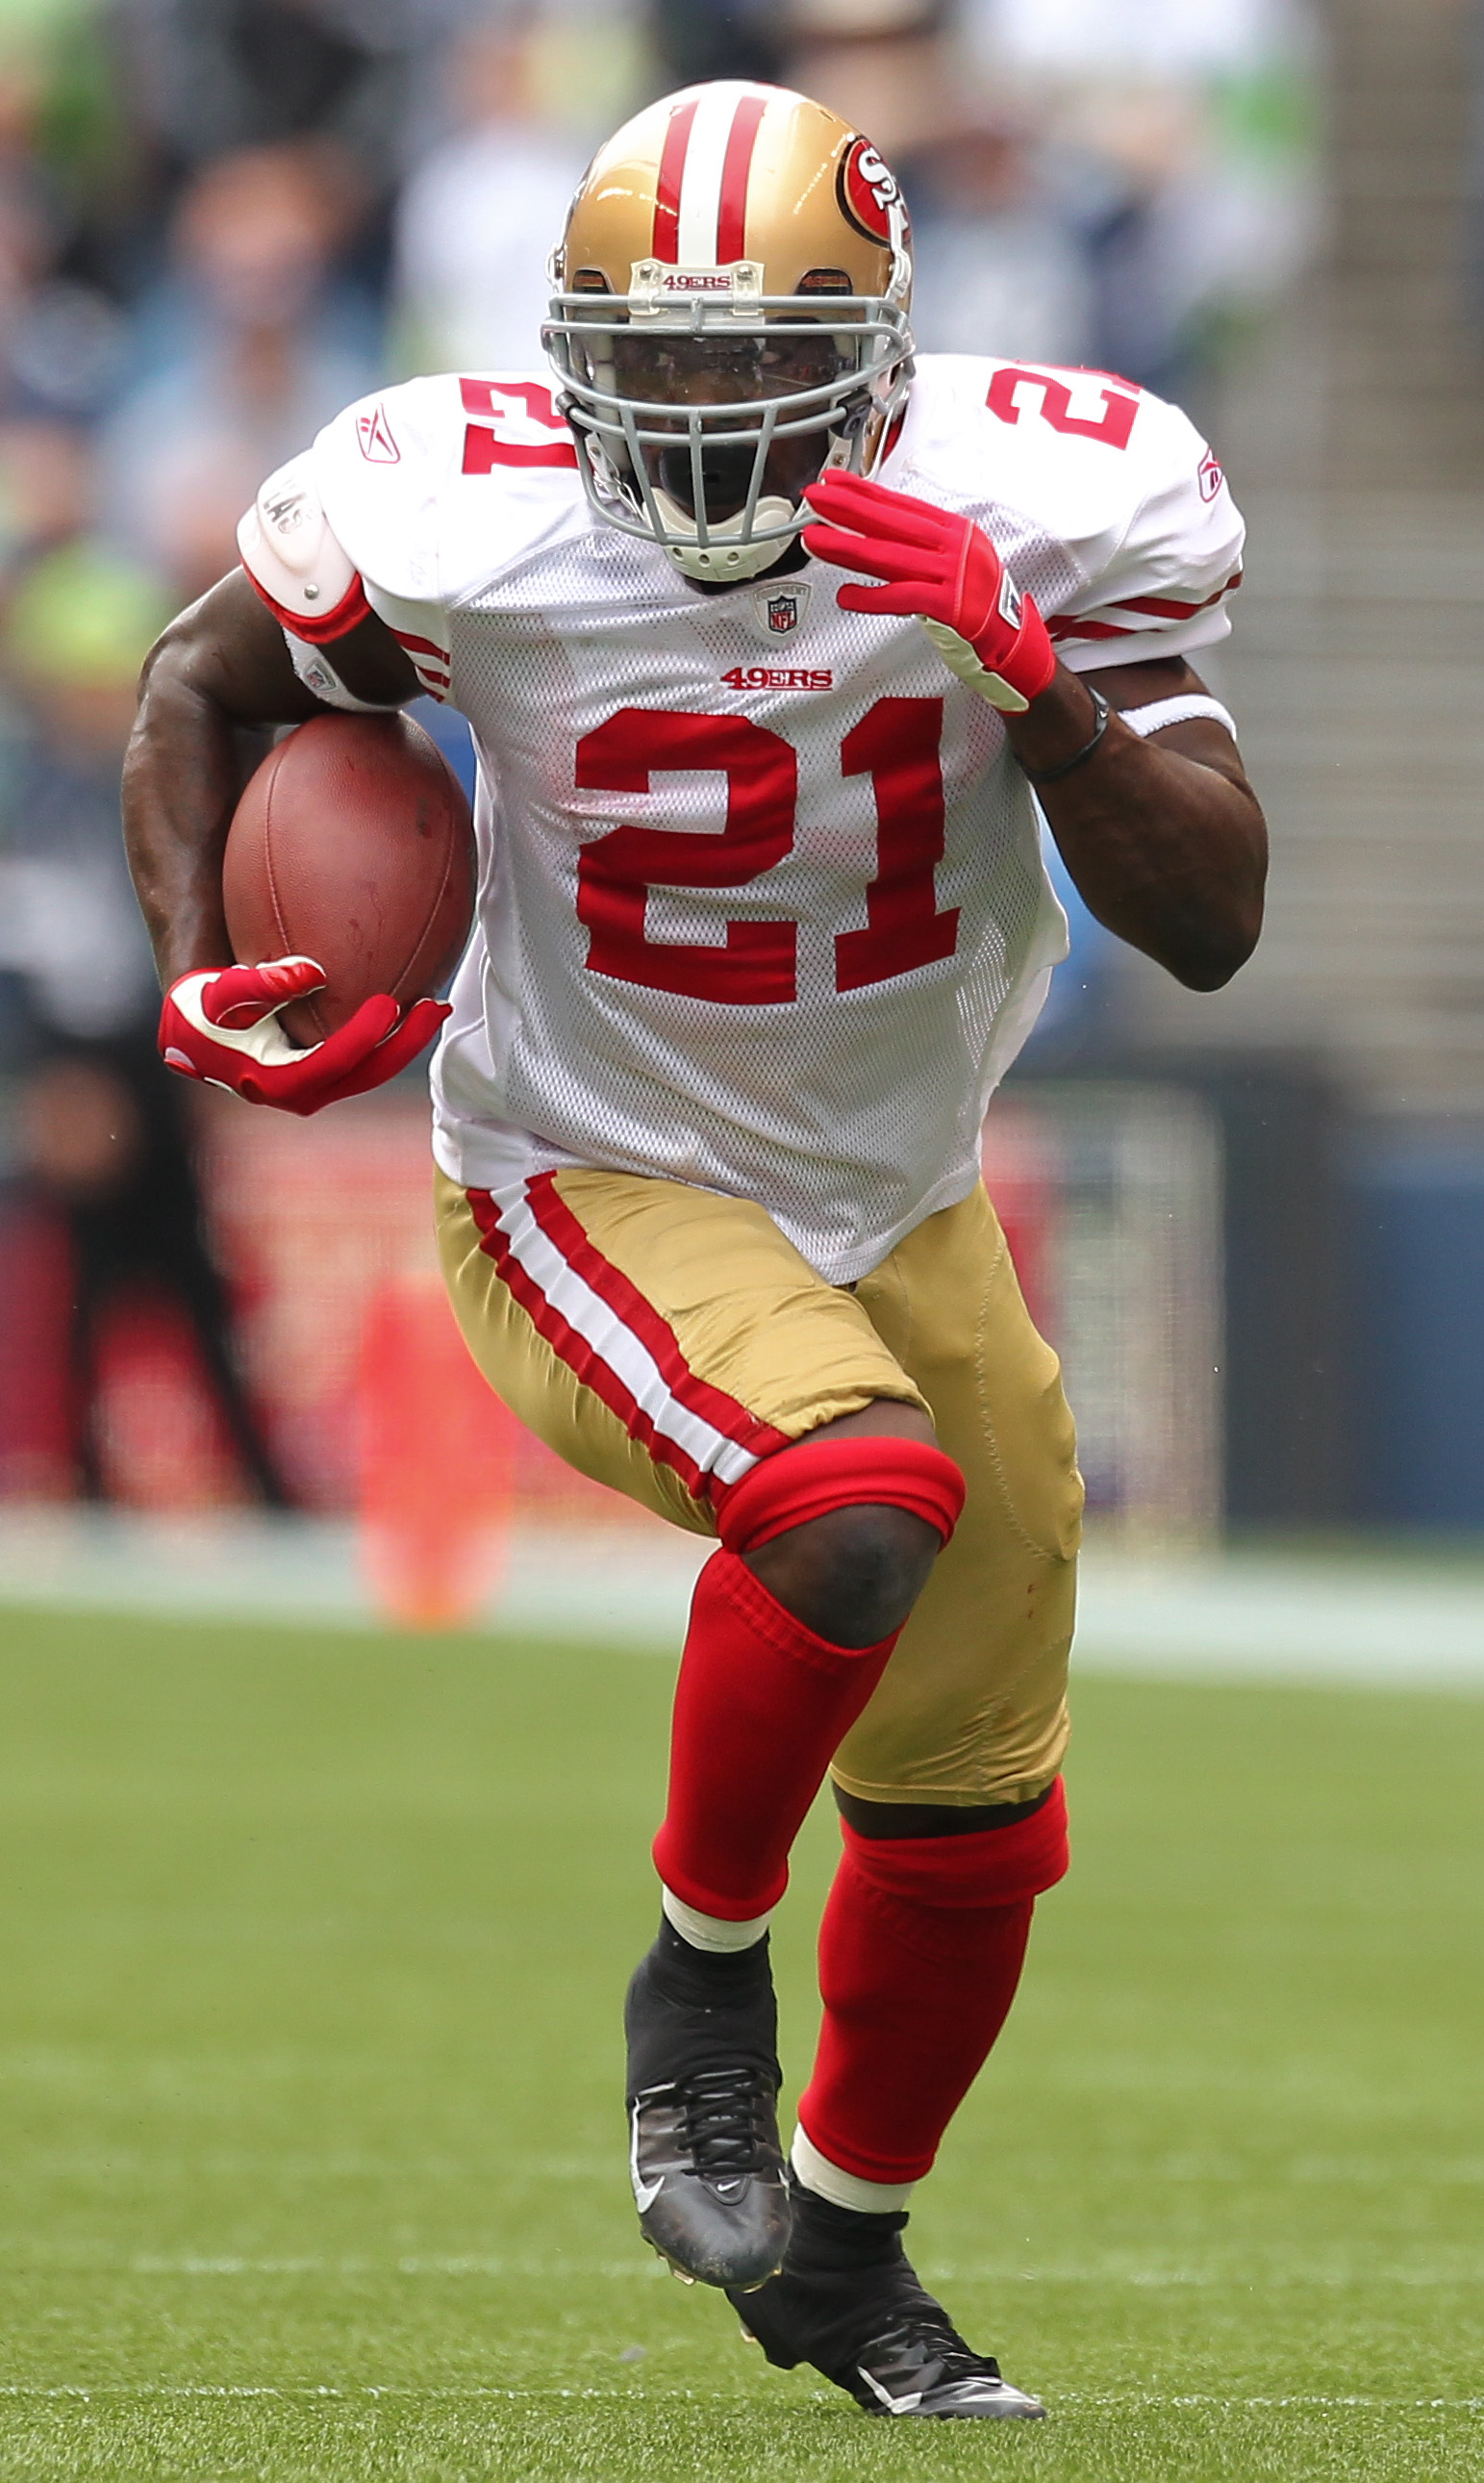 Frank Gore injury: 49ers RB returns to practice - SB Nation Bay Area